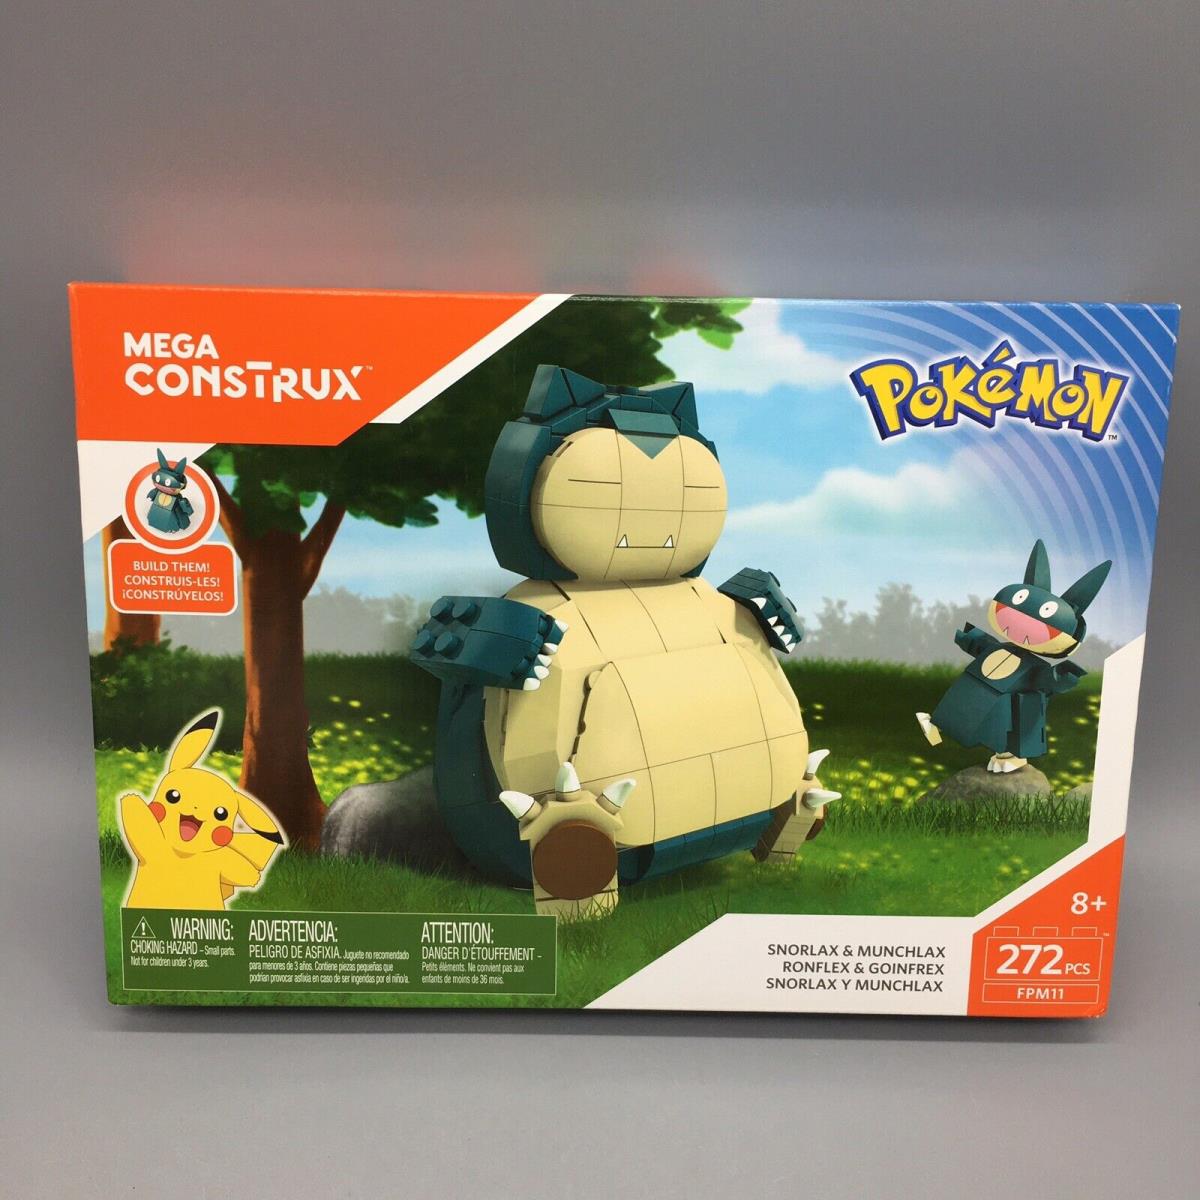 Mega Construx Pokemon 5 Inch Snorlax and 2 Inch Munchlax 272 pc Building Set